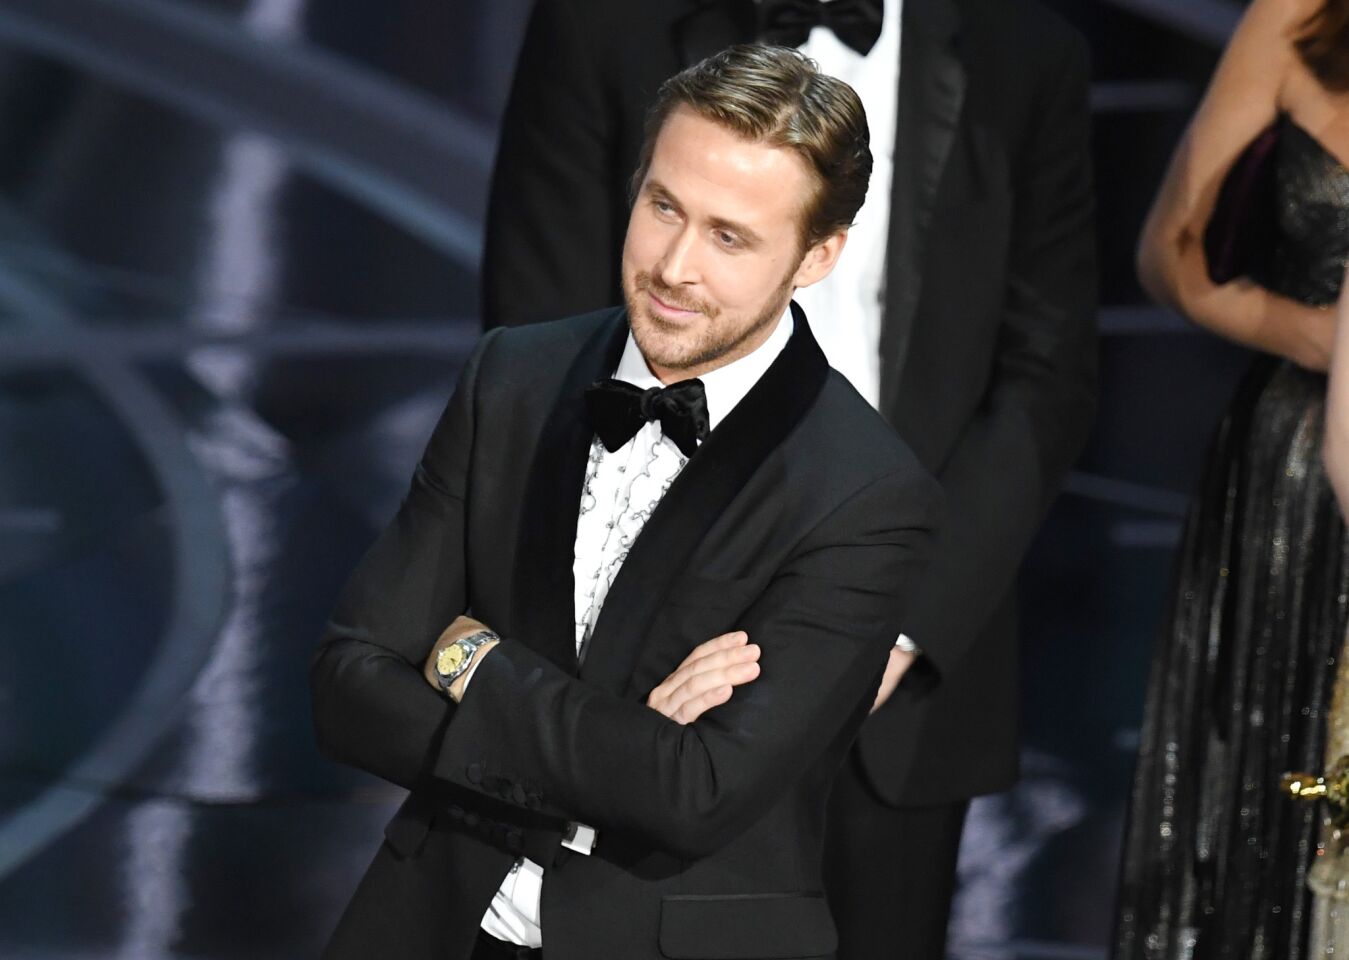 Ryan Gosling learns that his film, "La La Land," did not win the best picture Oscar.